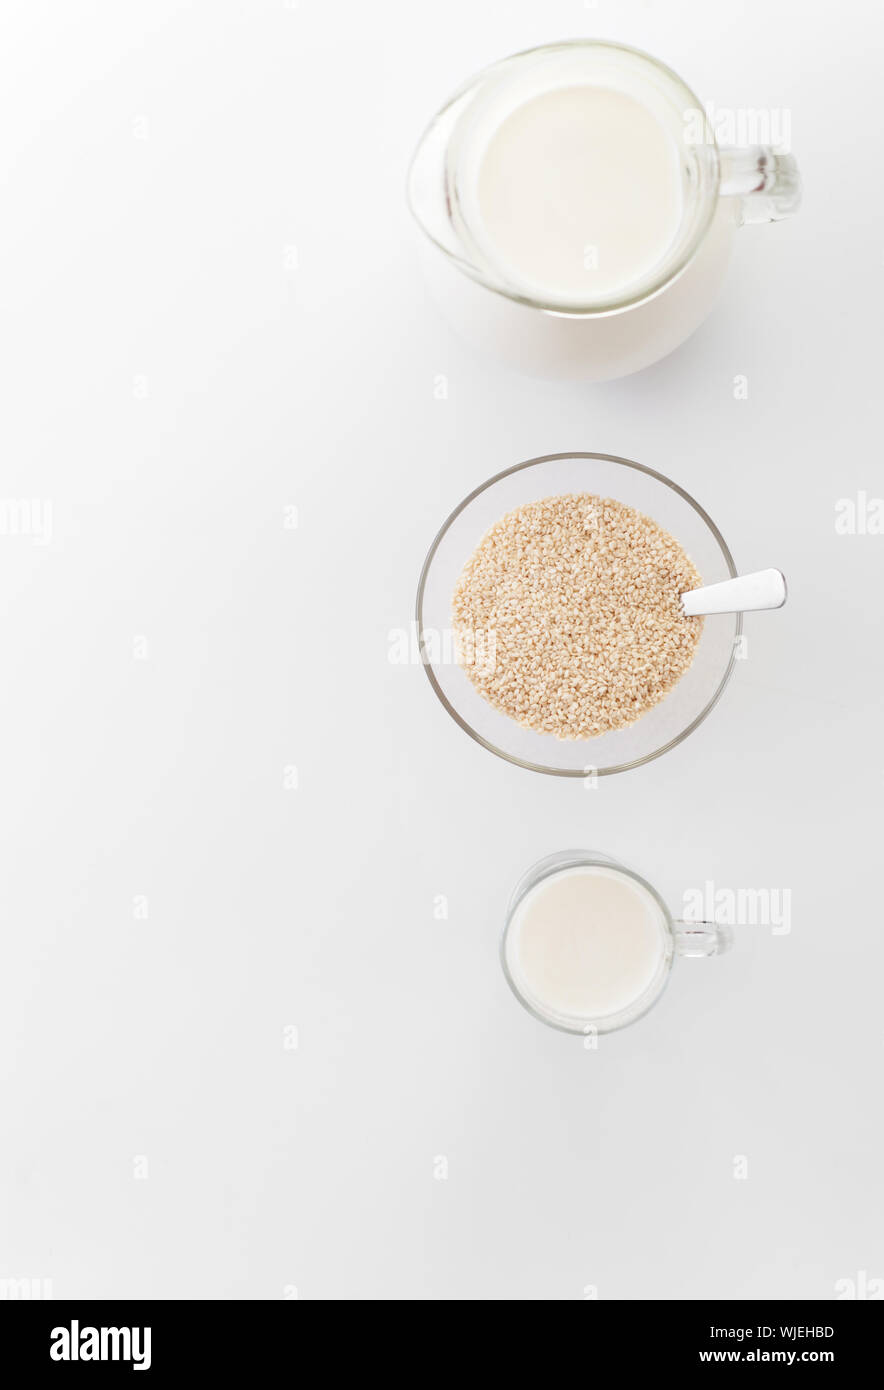 Vegan non diary milk from sesame seeds  in  glass cup  and in the pitcher on light  background. Selective focus. Food and drink, health care, dieting. Stock Photo